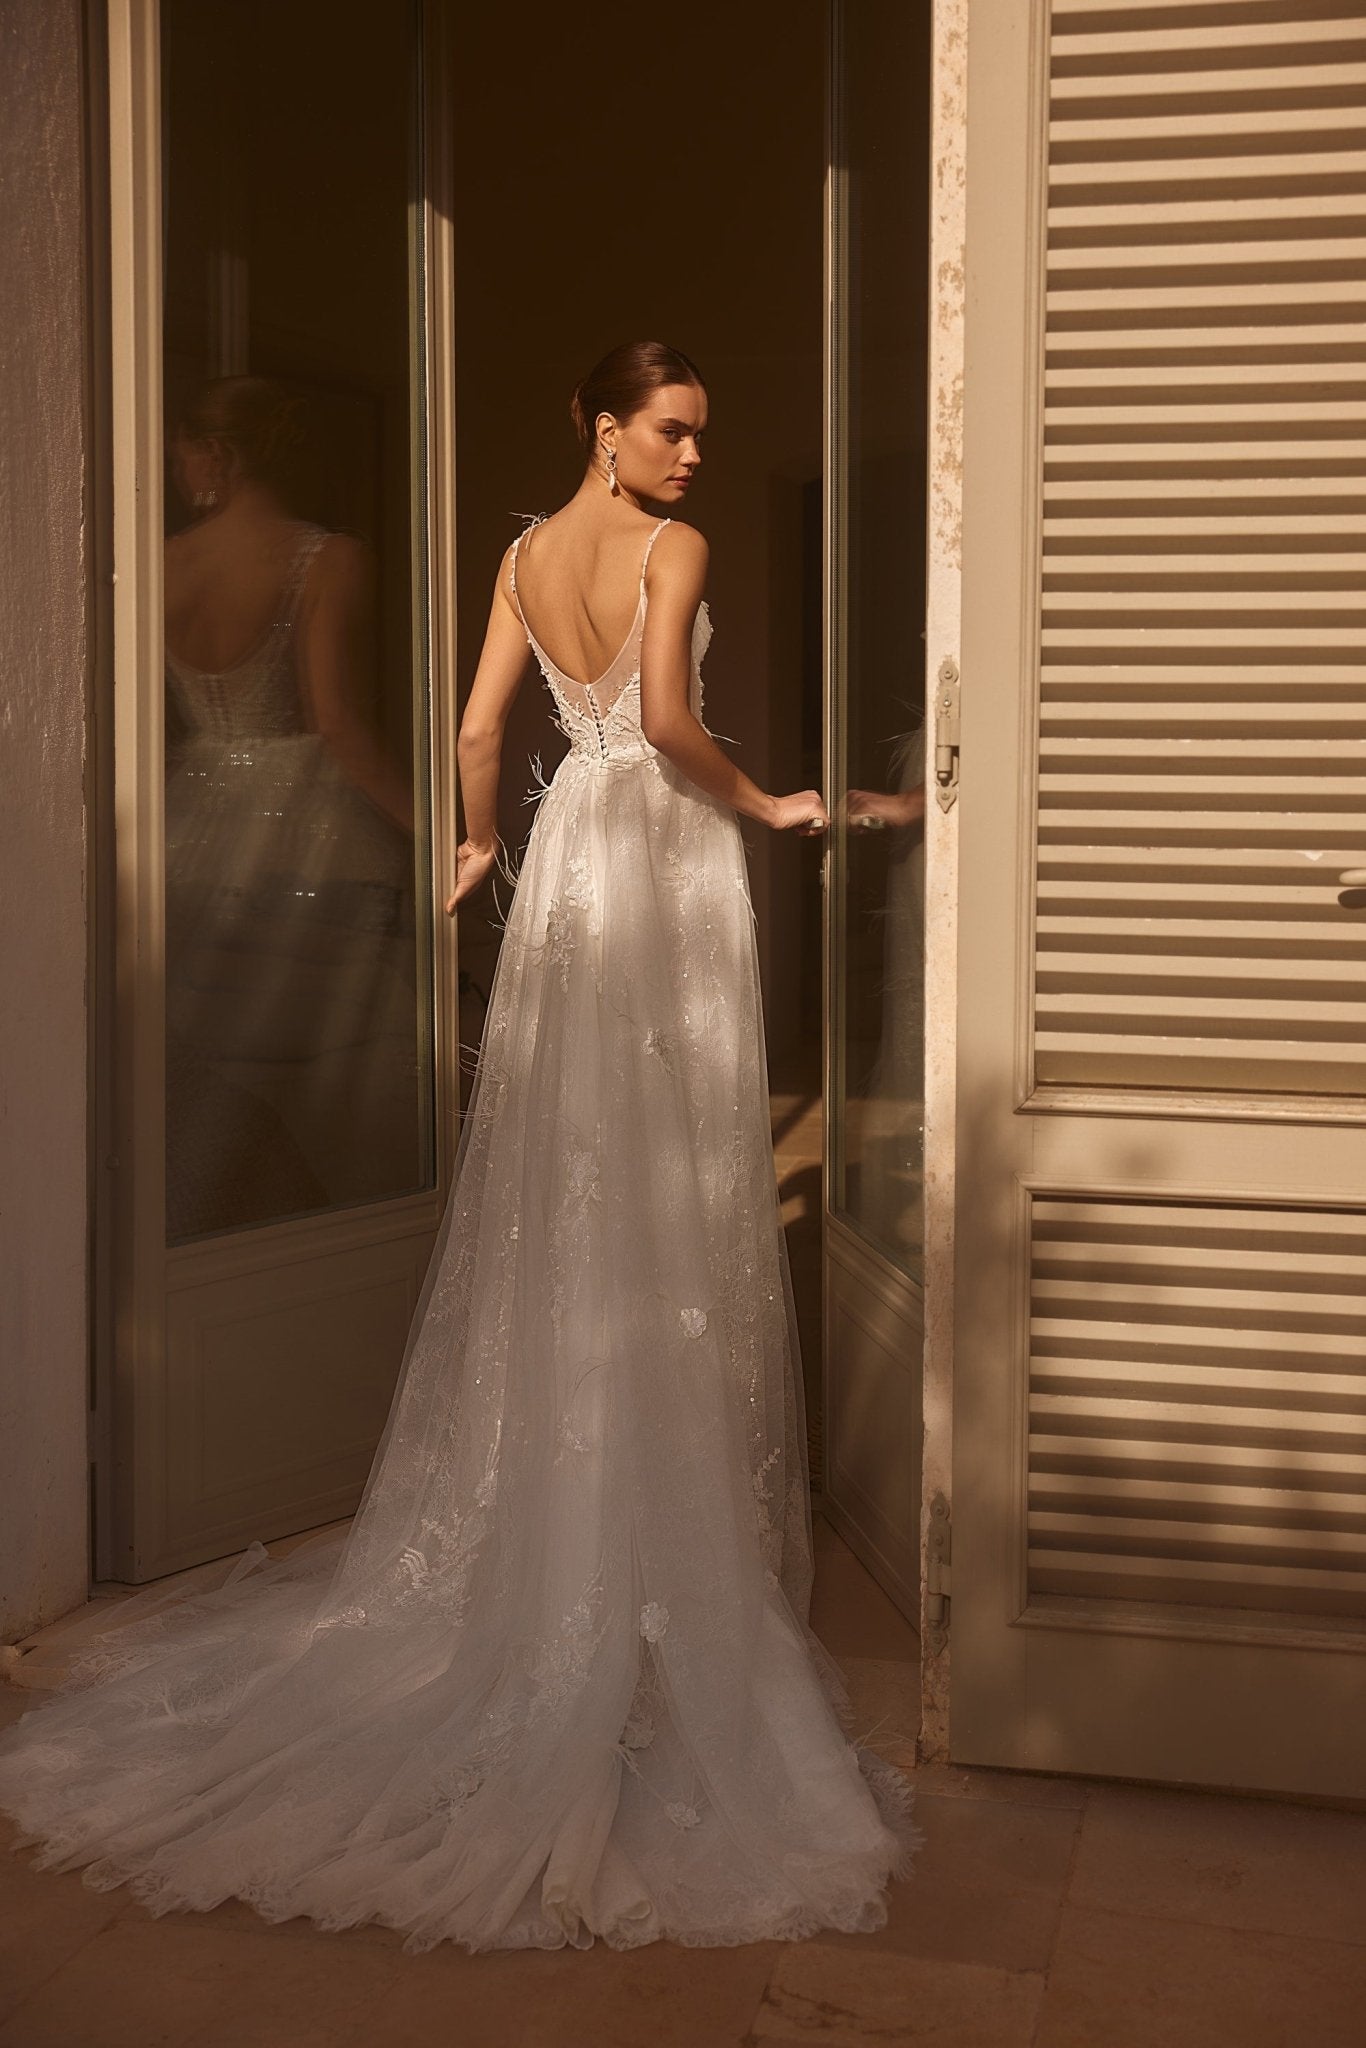 Floral Embellished Deep V-Neck Wedding Gown with Airy Tulle Train Plus Size - WonderlandByLilian